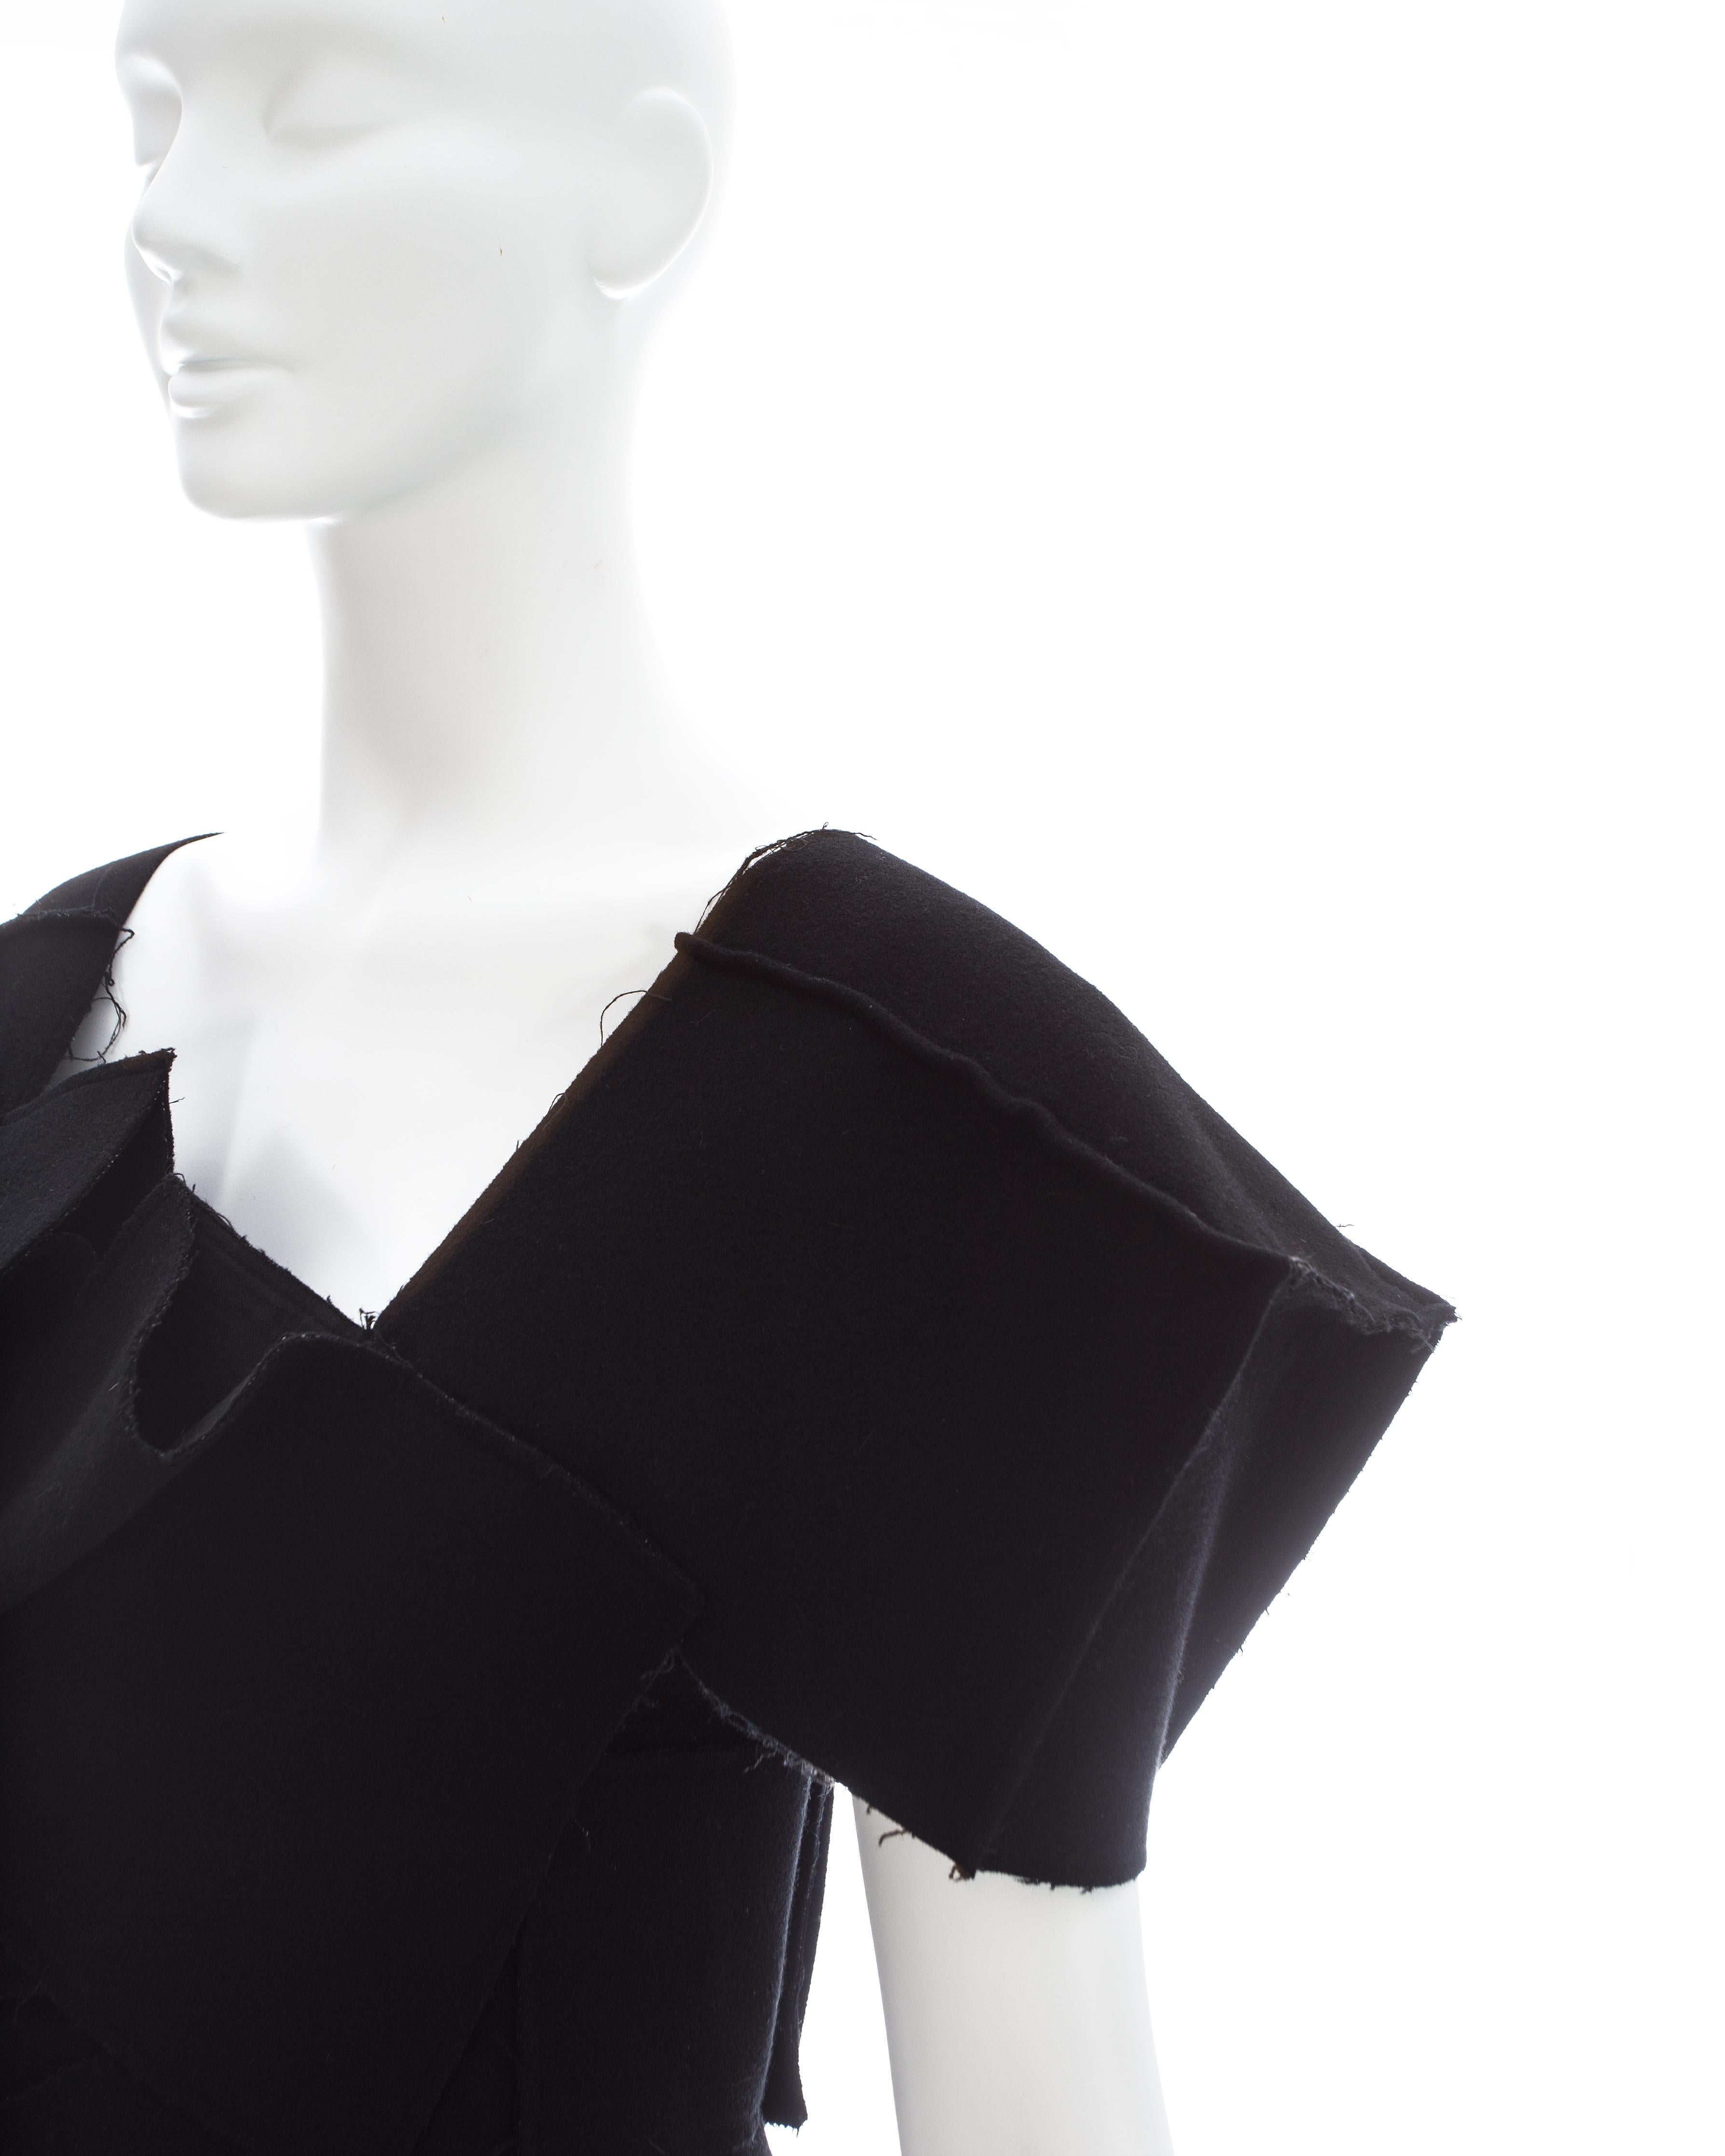 Yohji Yamamoto black wool top made with bellow pockets, fw 1990 In Good Condition For Sale In London, GB